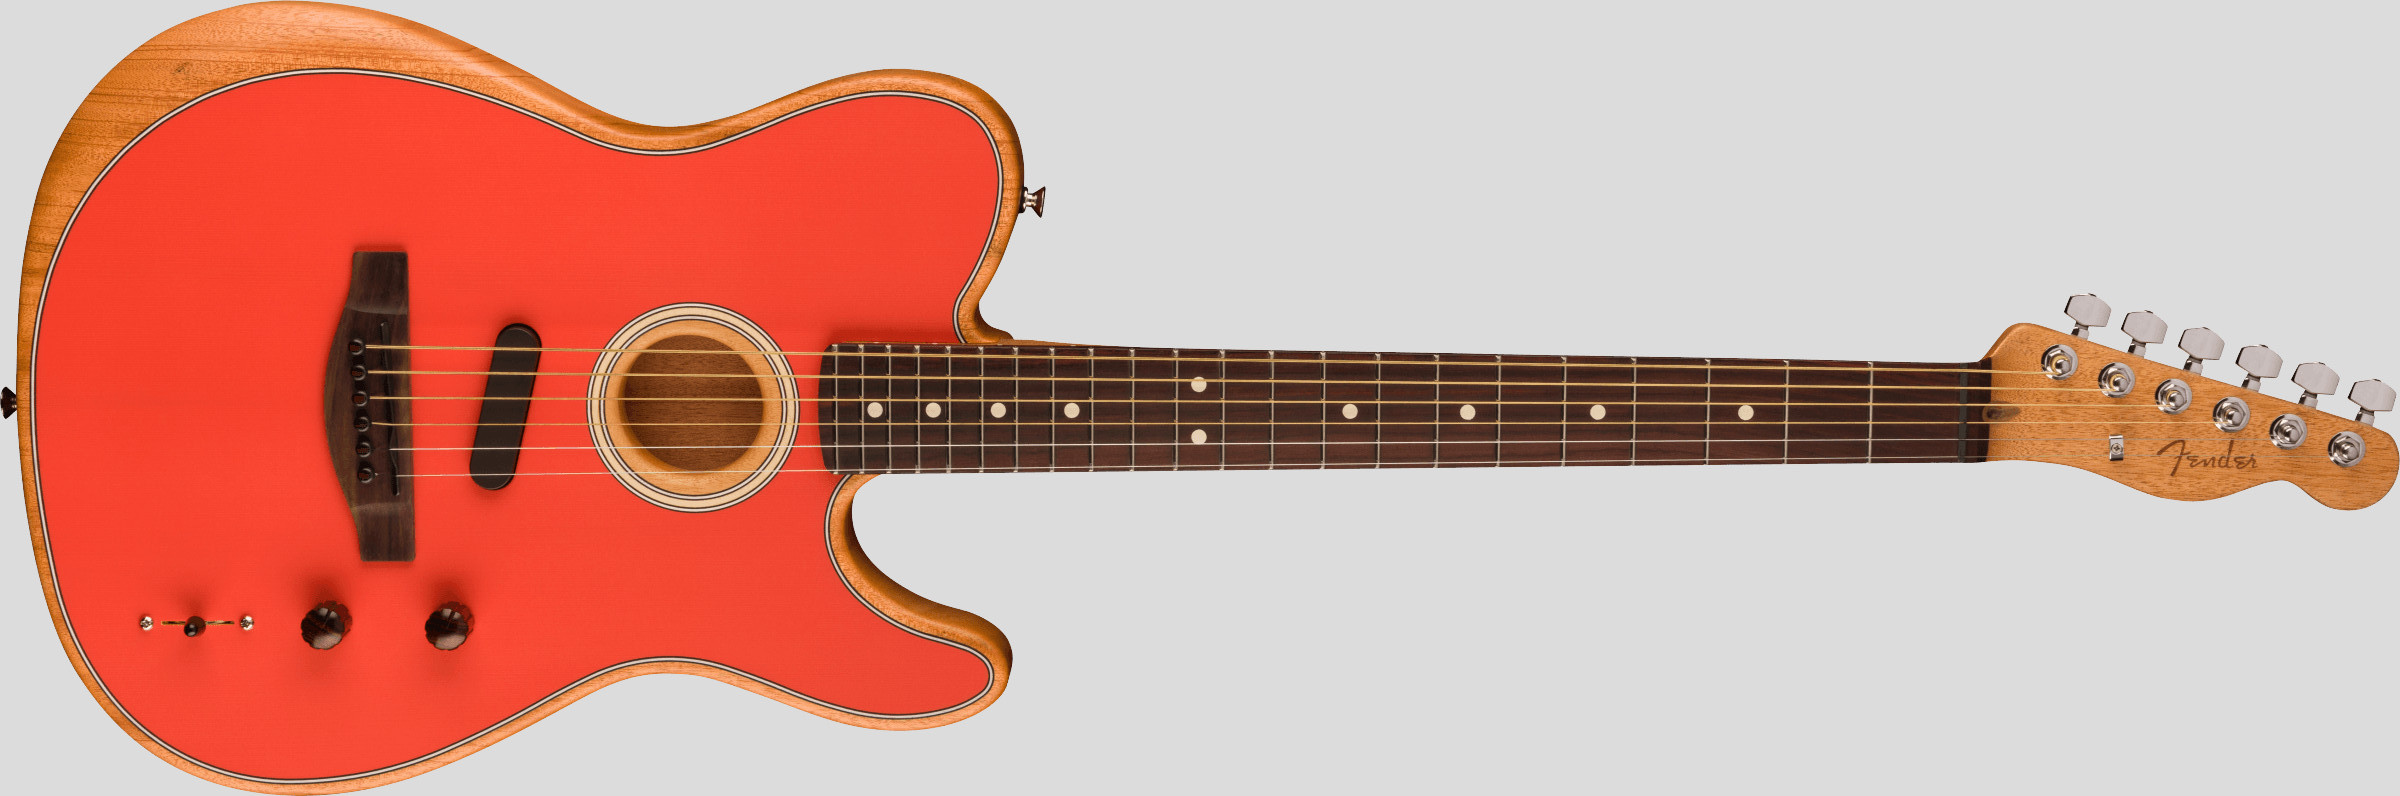 Fender Limited Edition Acoustasonic Player Telecaster Fiesta Red 4